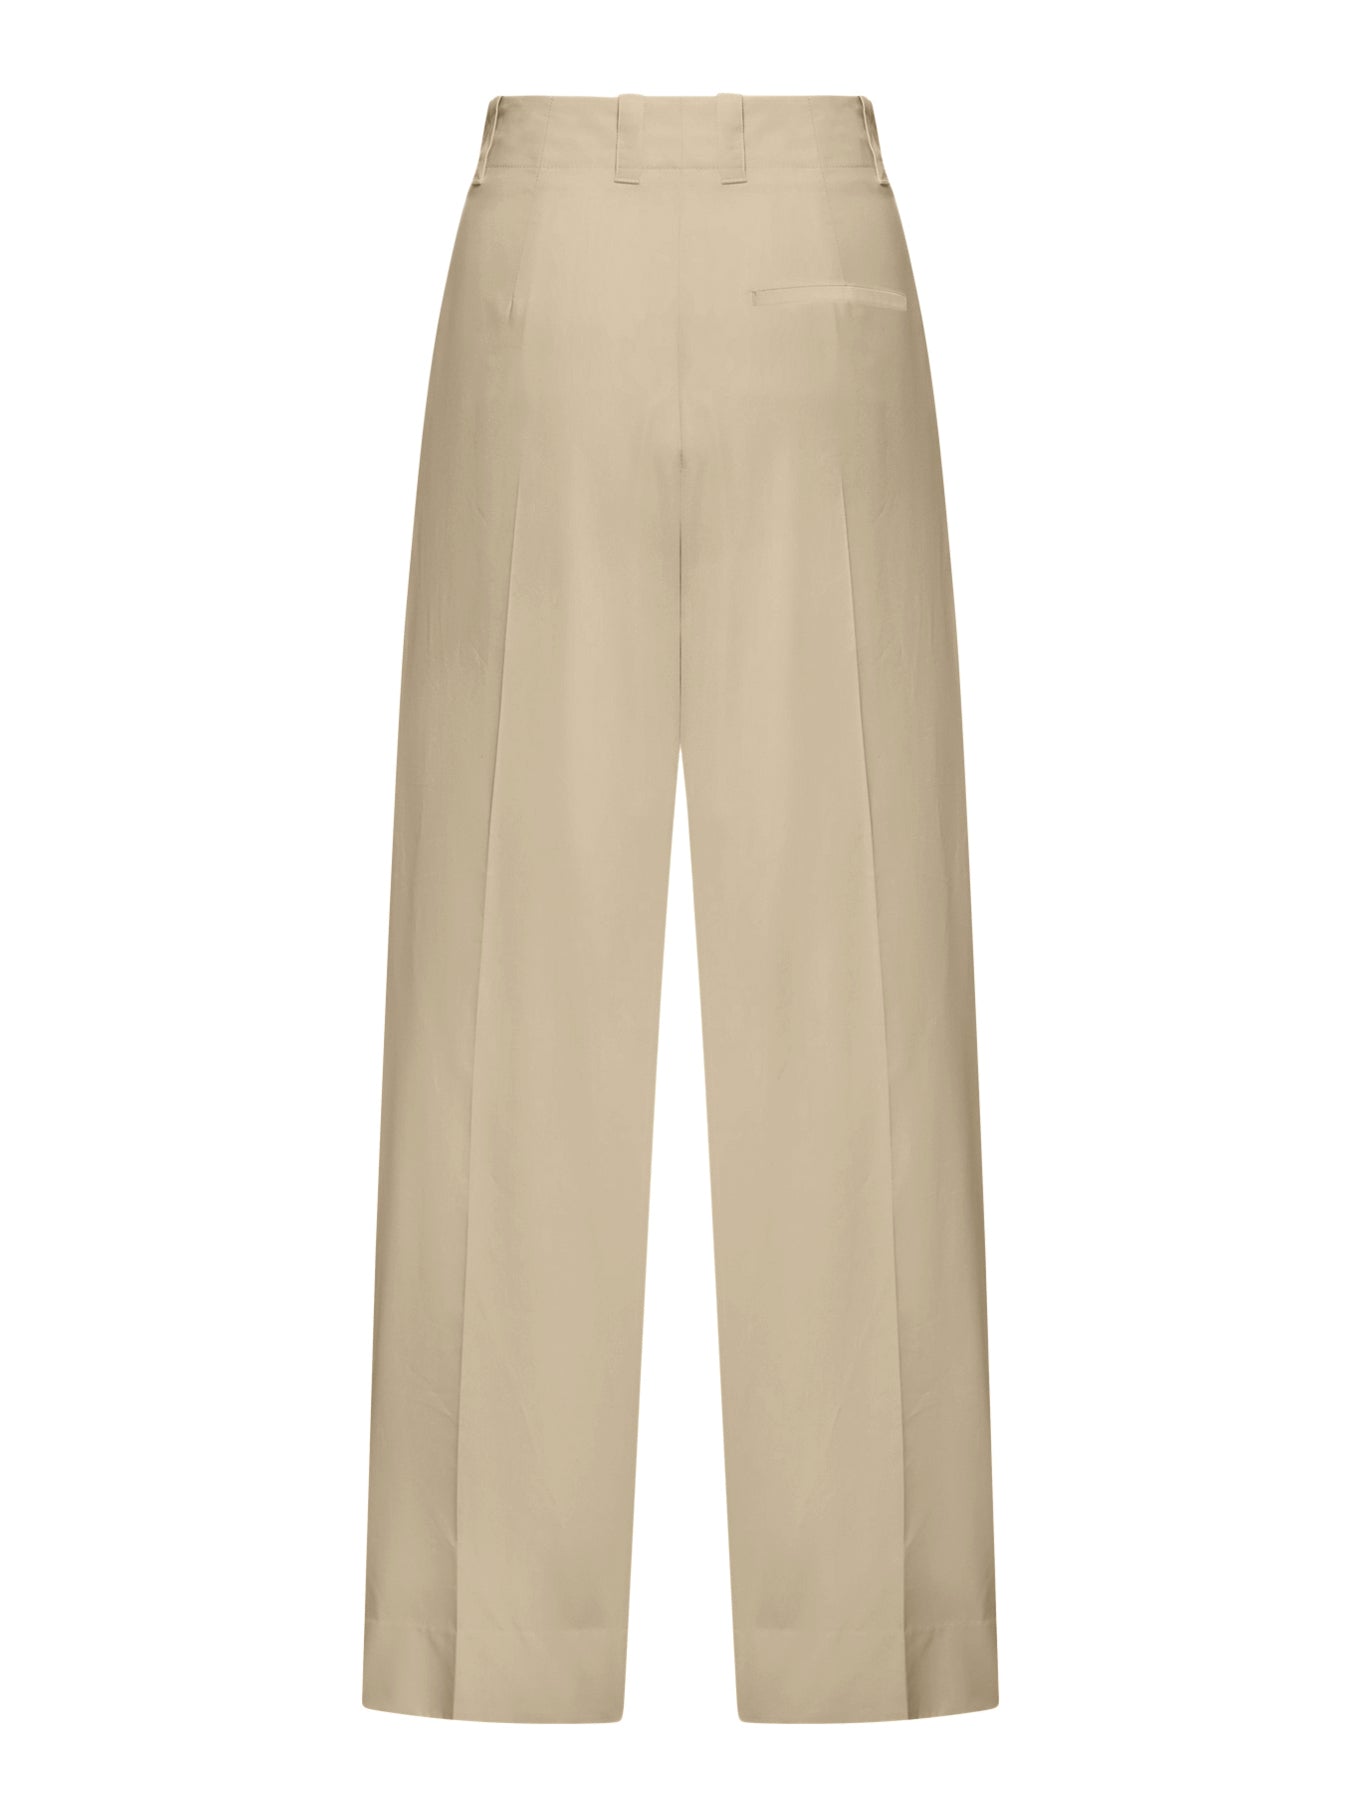 Silk and cotton trousers